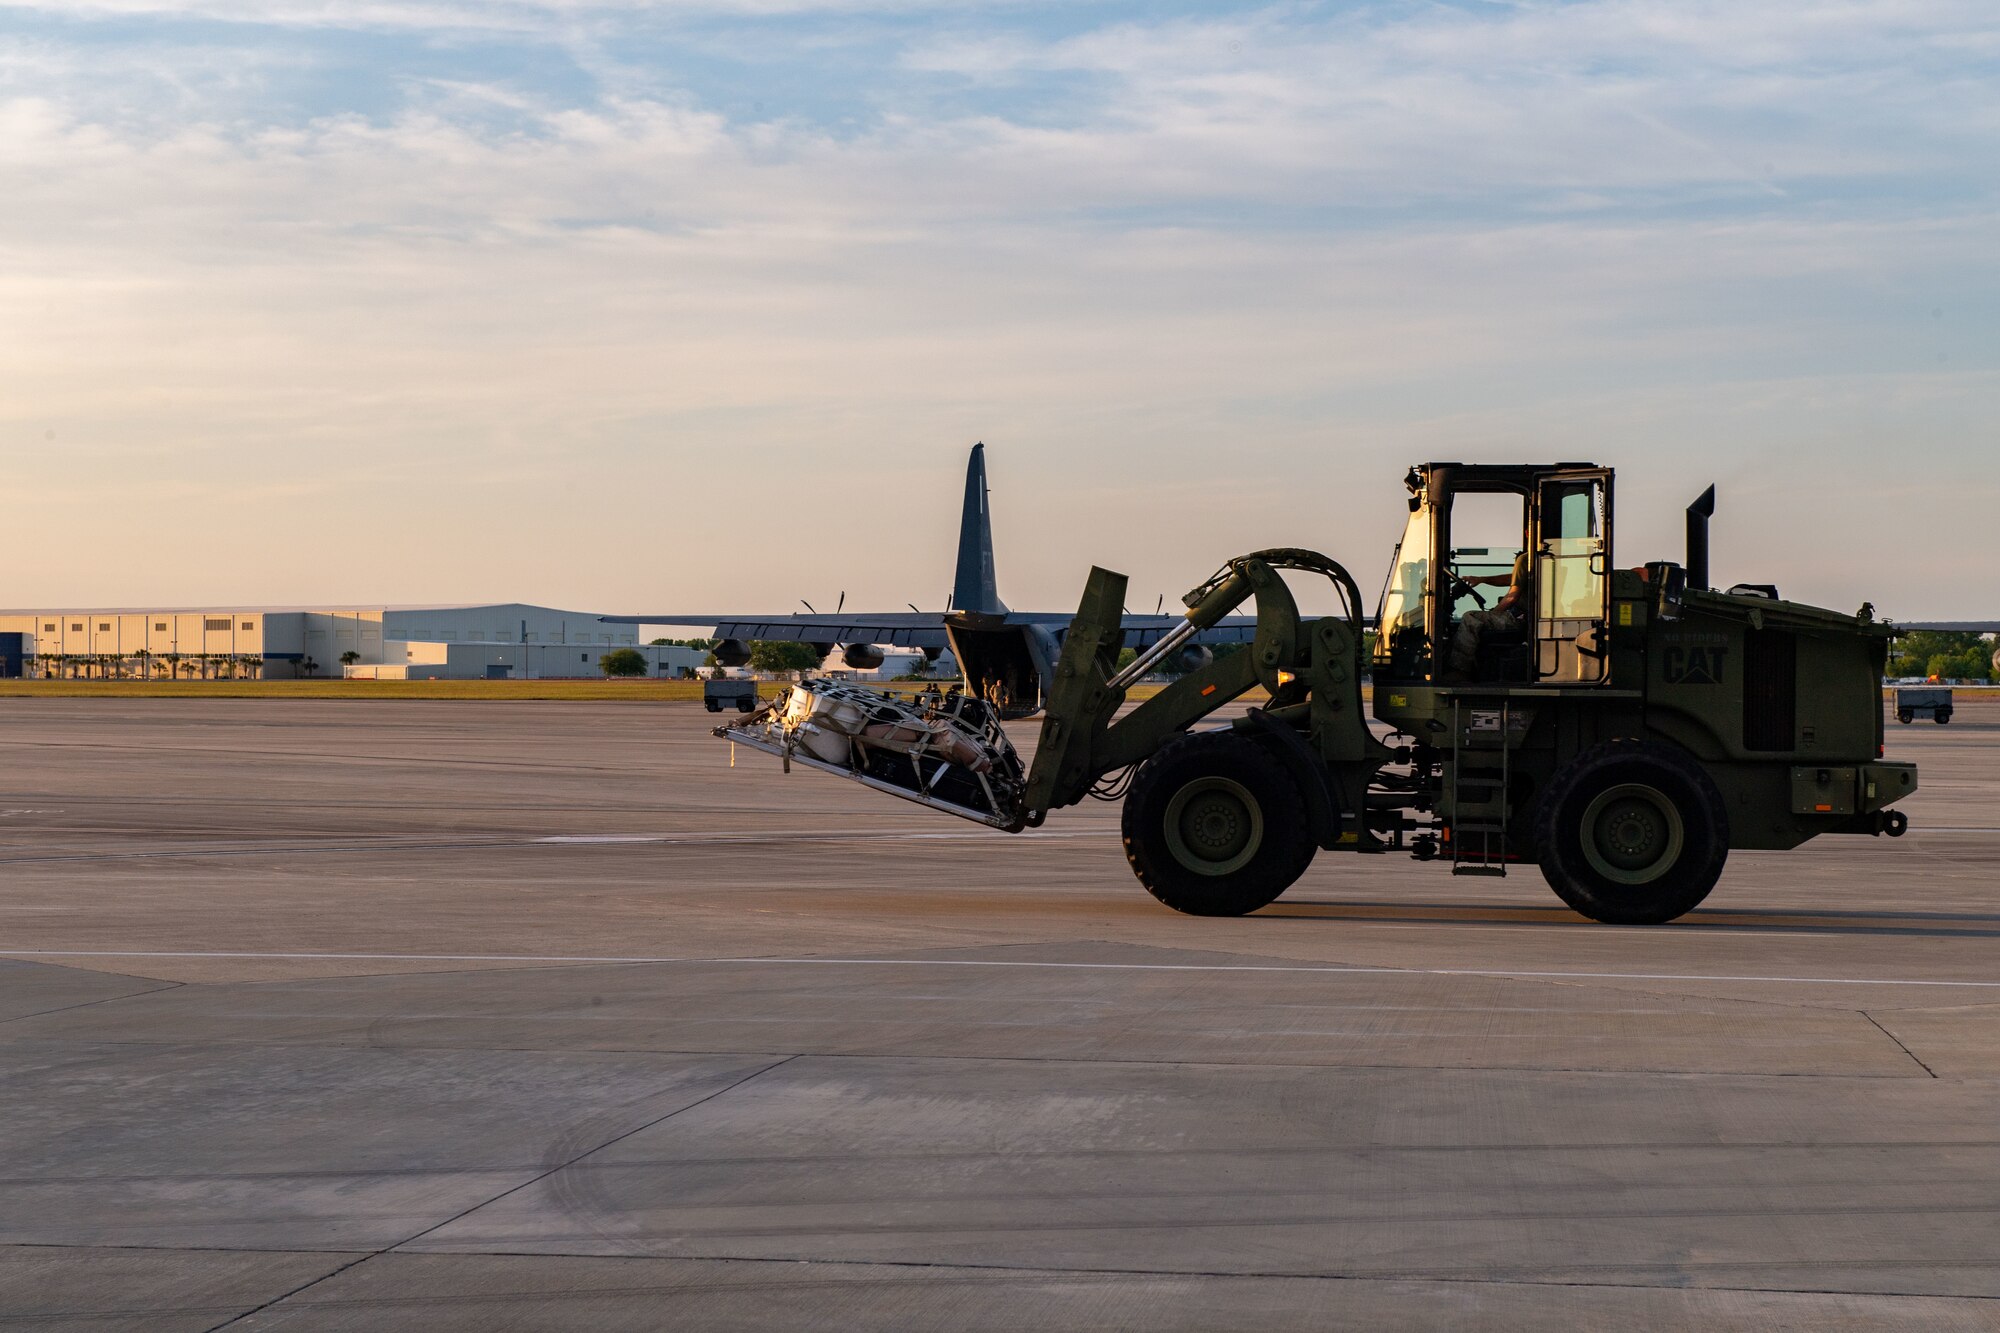 A U.S. Air Force Airman assigned to the 23rd Wing transports cargo from an aircraft during Exercise Ready Tiger  24-1 at Savannah Air National Guard Base, Georgia, April 8, 2024. The exercise was designed to test the 23rd Wing’s preparedness, specifically focusing on their ability to rapidly deploy and sustain operations in austere environments. The Ready Tiger 24-1 exercise evaluators will assess the 23rd Wing's proficiency in employing decentralized command and control to fulfill air tasking orders across geographically dispersed areas amid communication challenges. (U.S. Air Force photo by Senior Airman Courtney Sebastianelli)